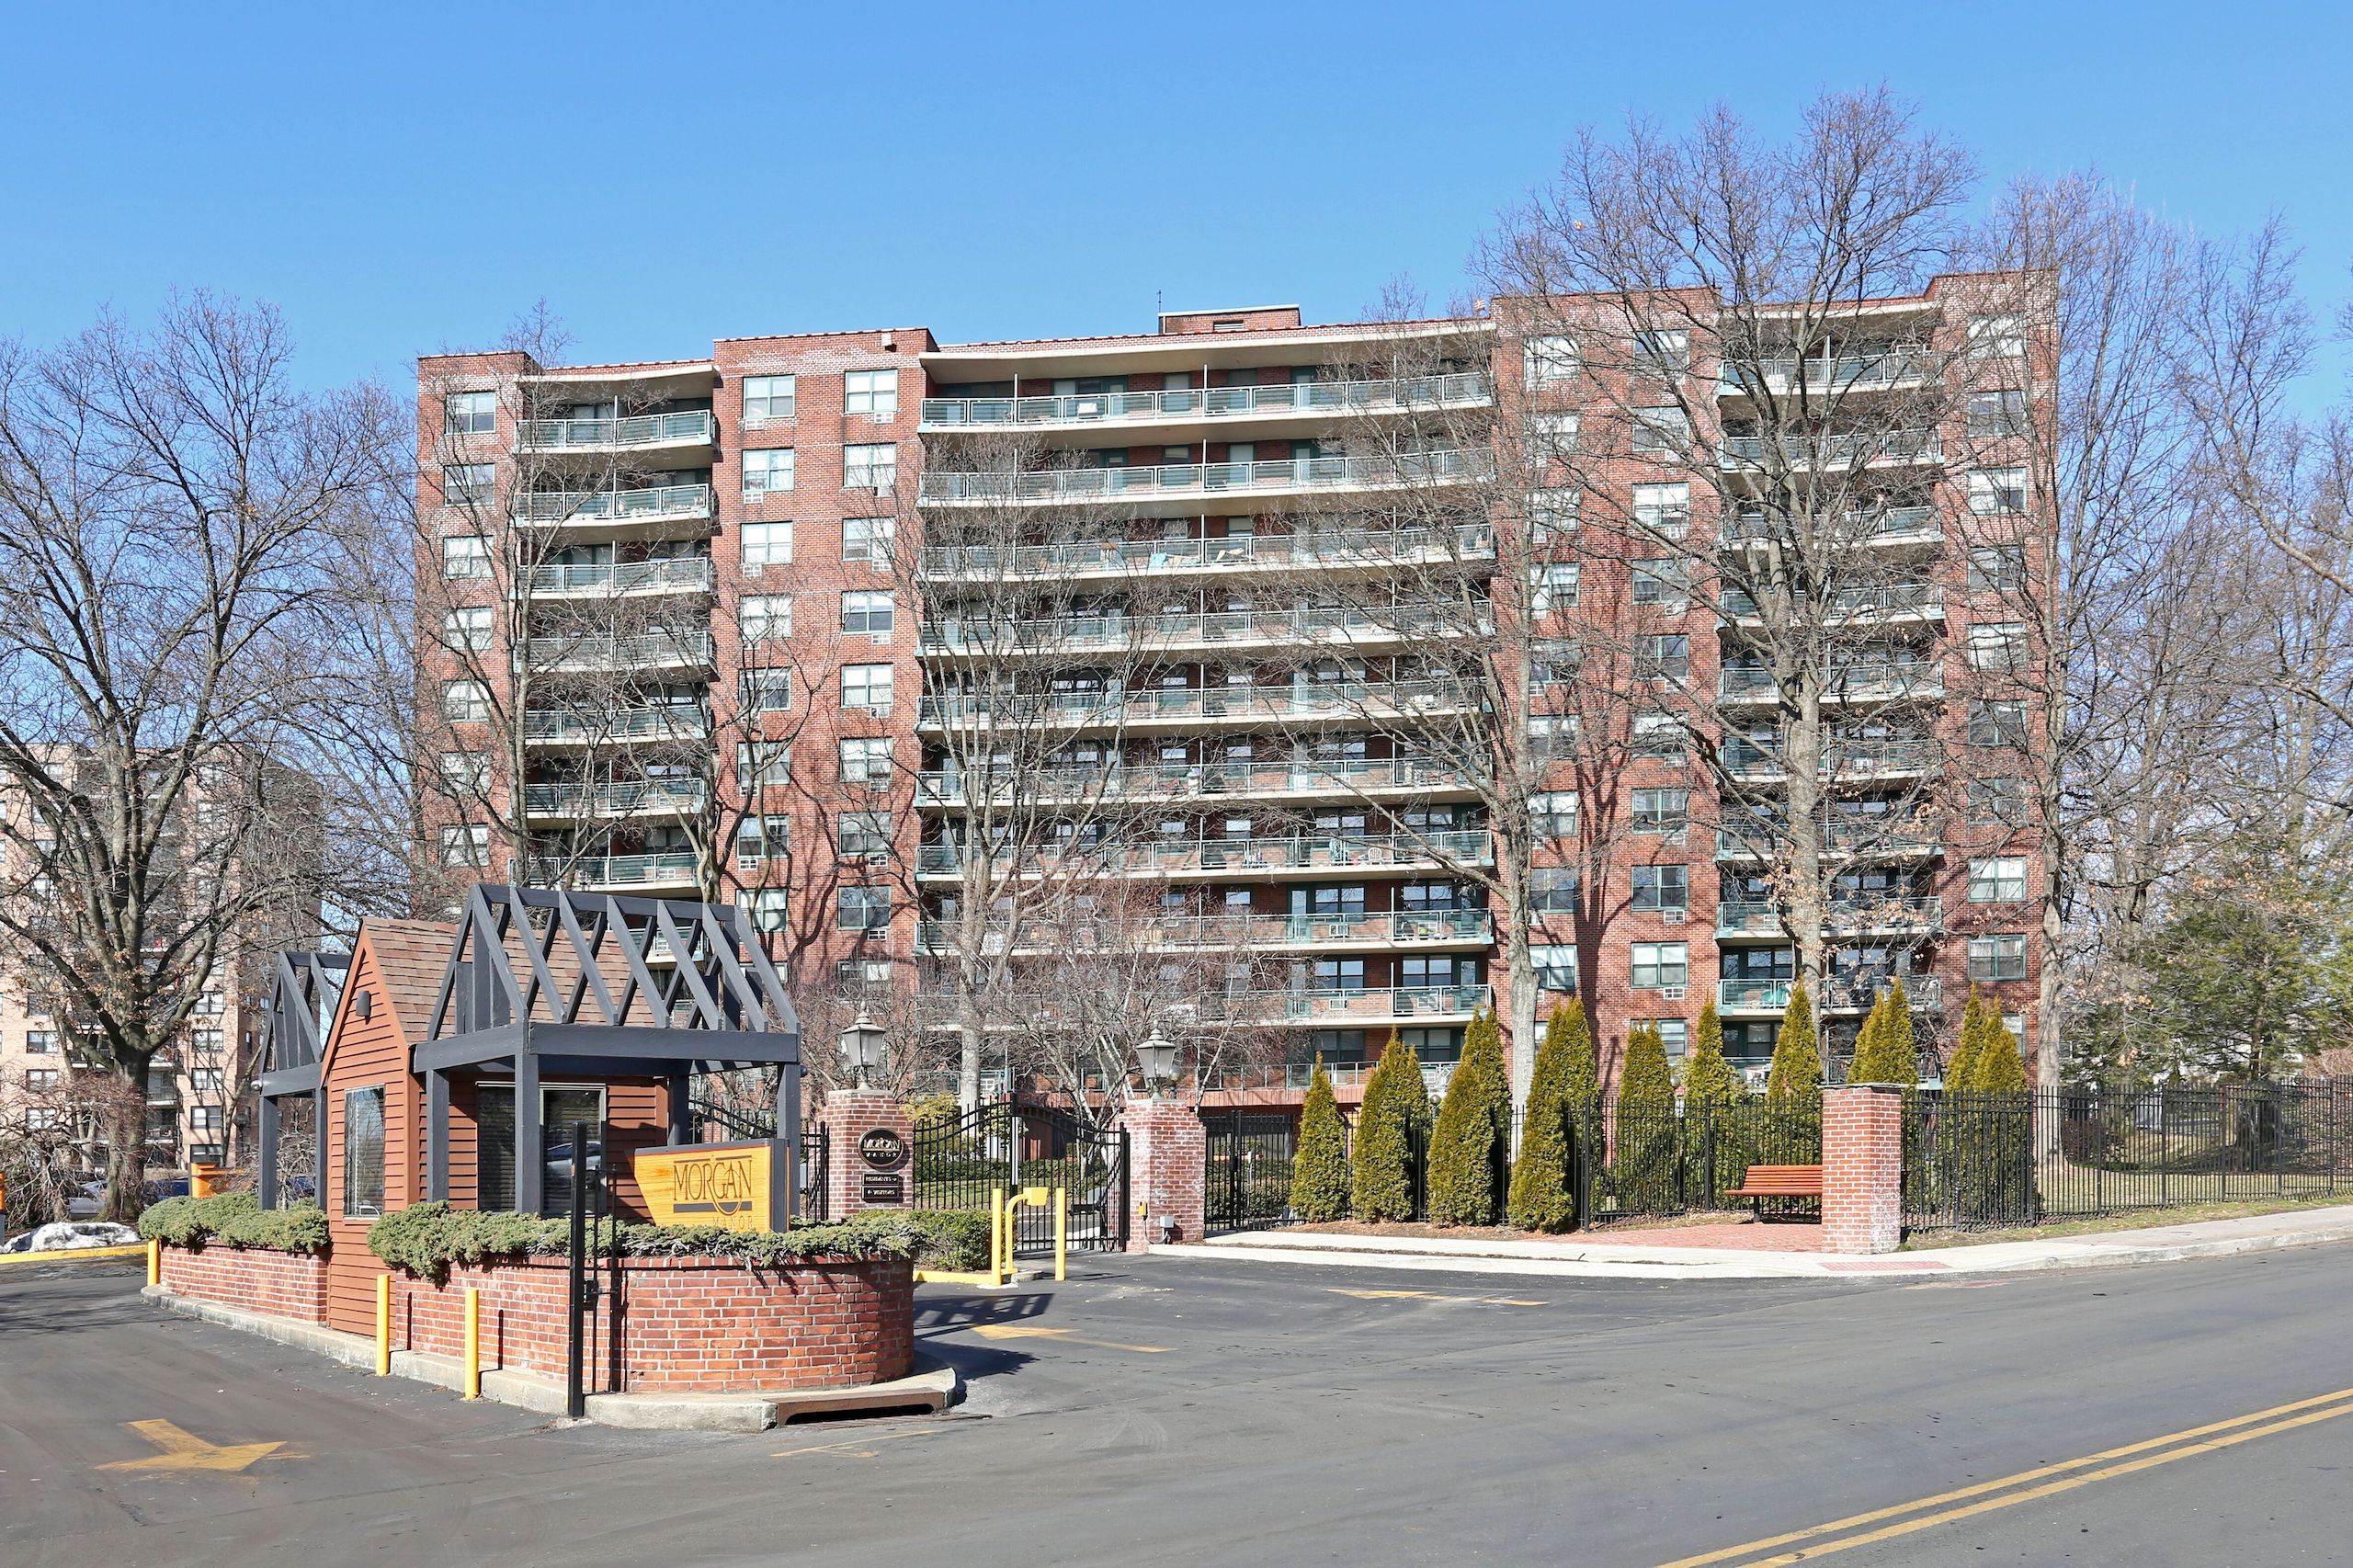 203 Living - The Morgan residential rental building with balconies in gated community in Stamford